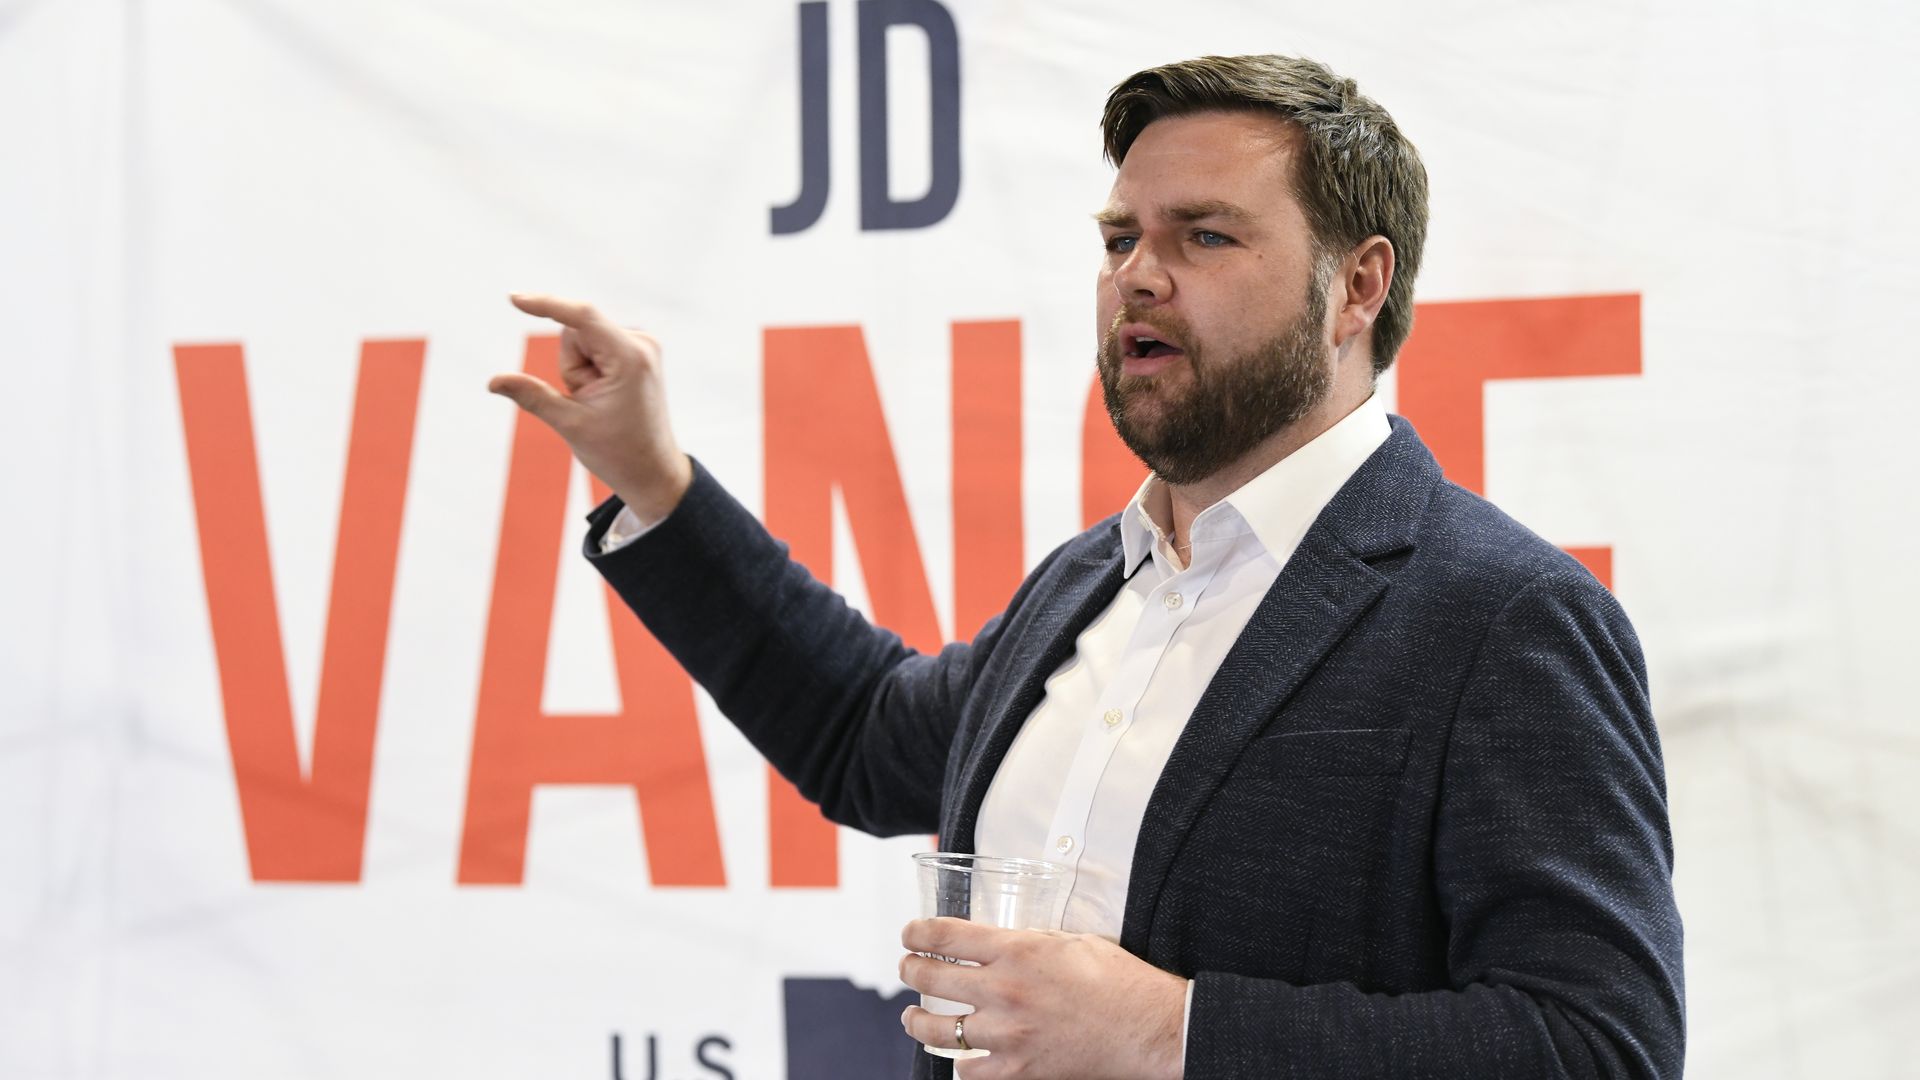 U.S. Senate candidate JD Vance speaks with prospective voters on the campaign trail on April 11, 2022 in Troy, Ohio.